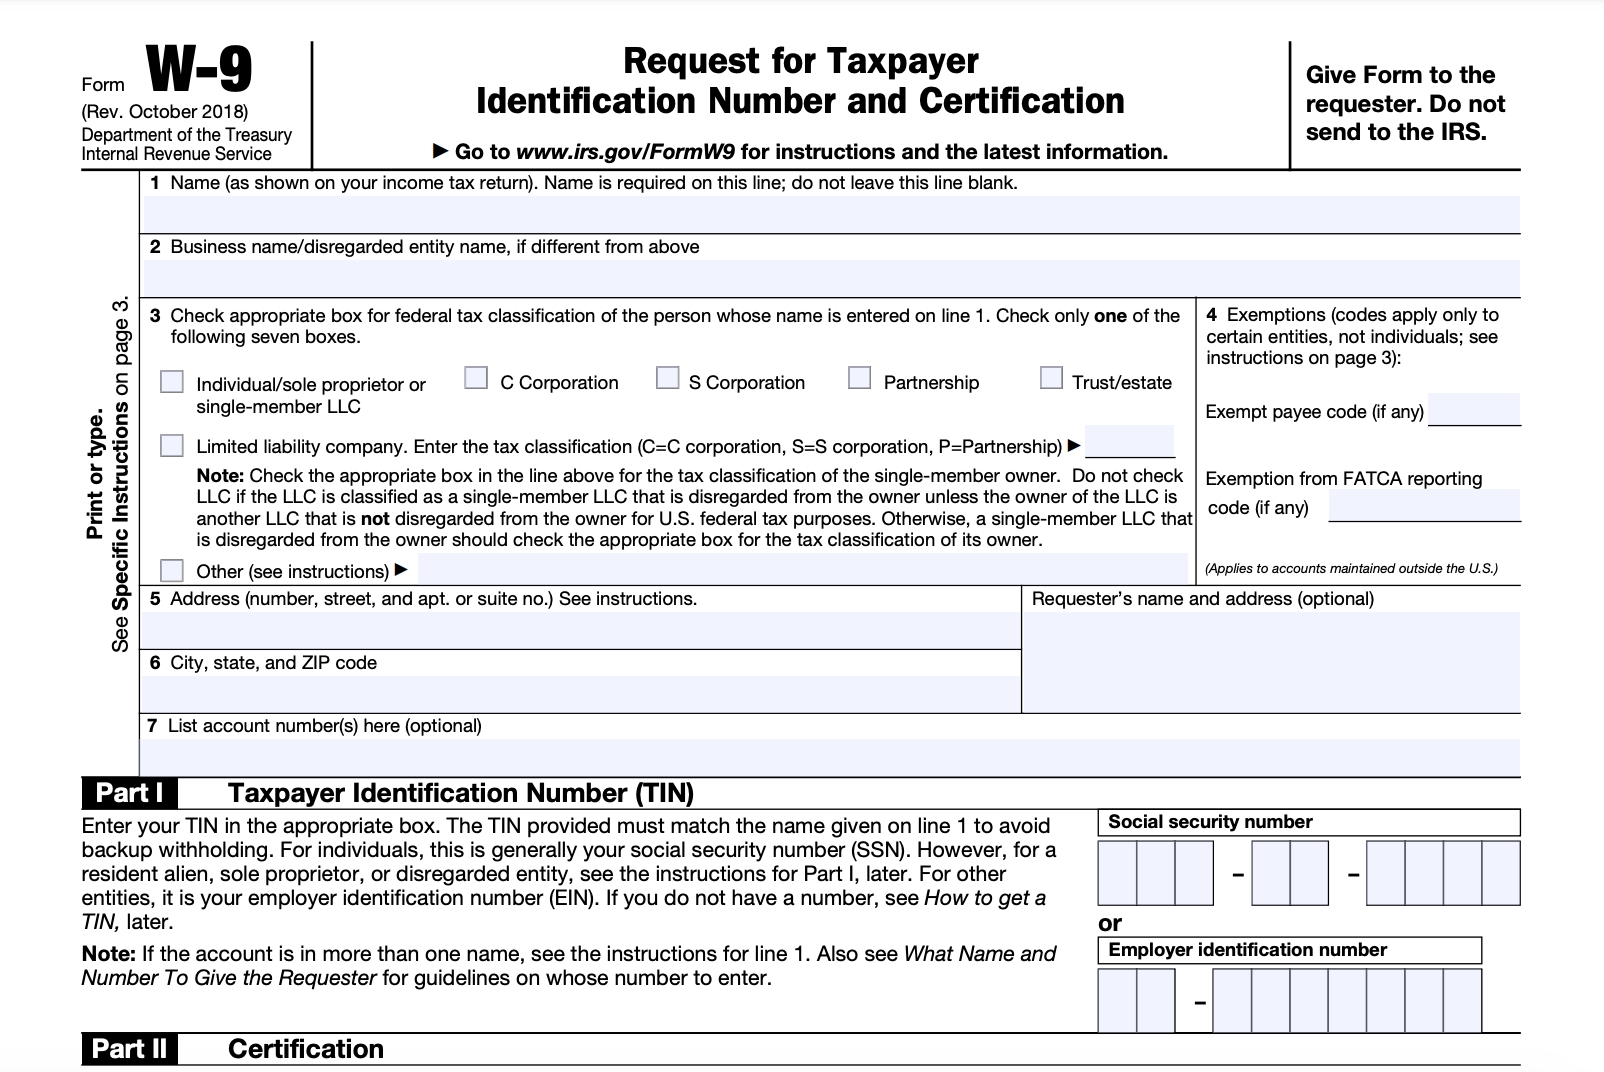 W-9 Form - Fill Out The Irs W-9 Form Online For 2019 | Smallpdf-2021 Blank W9 Irs